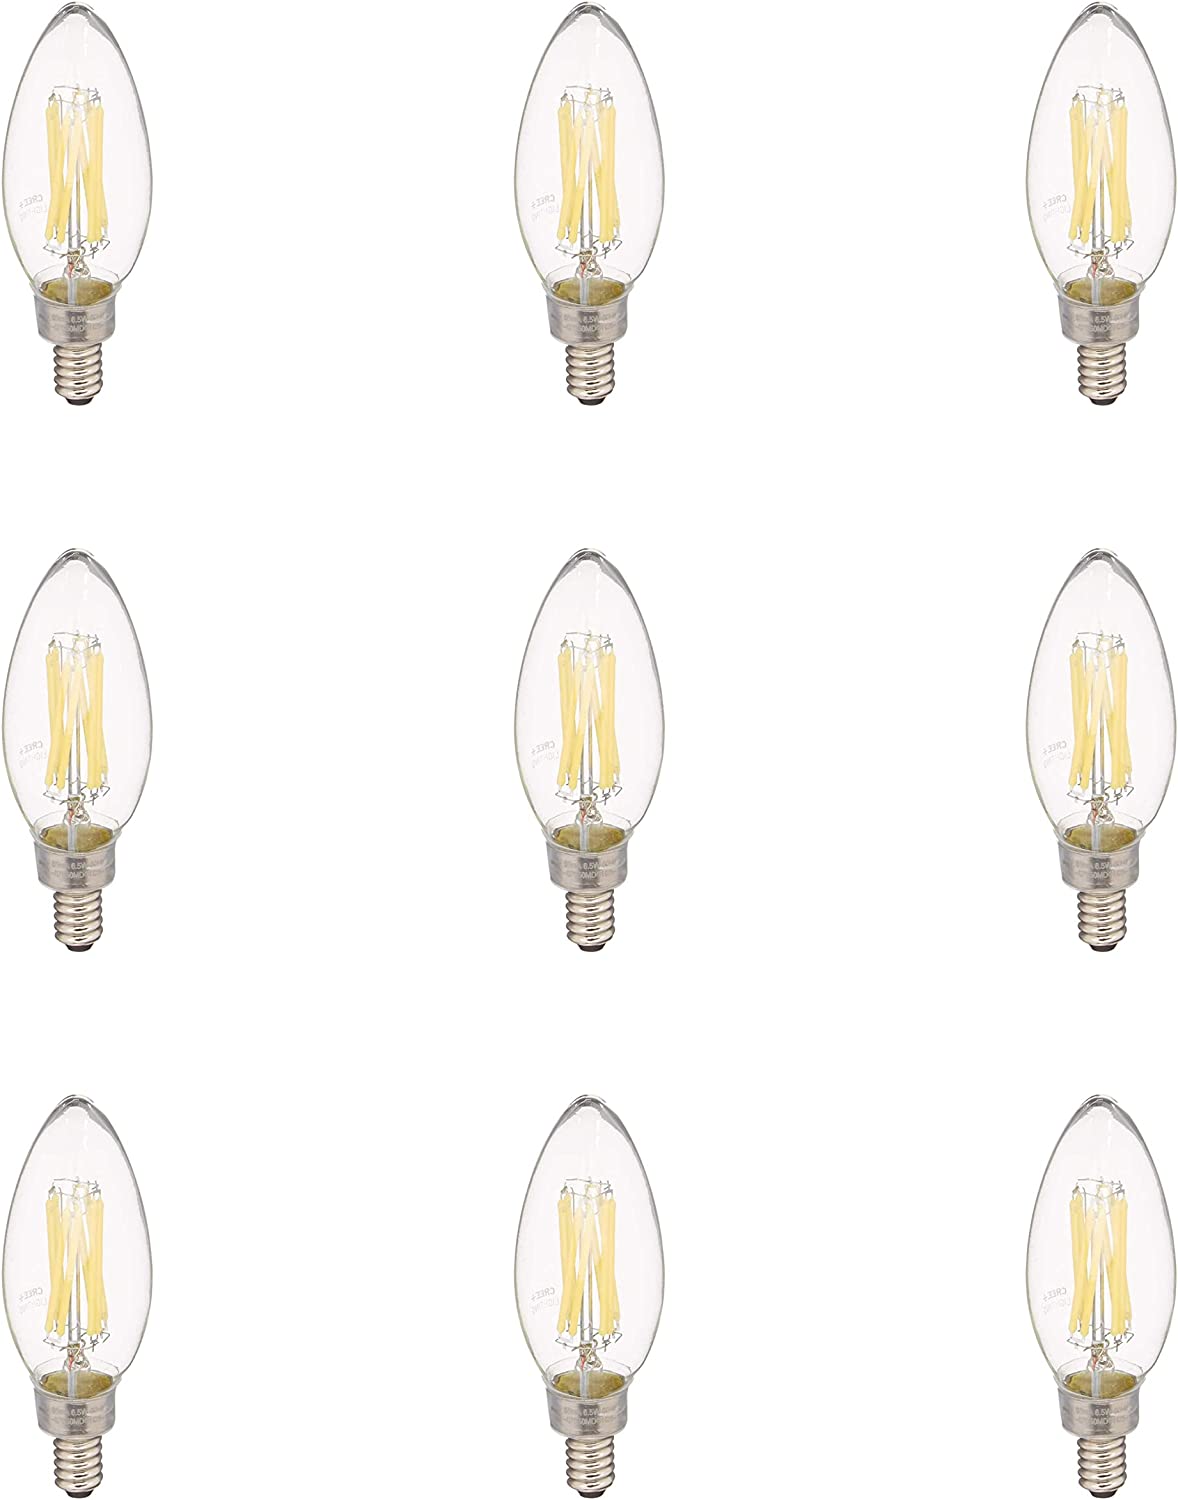 Cree Lighting TB11-07027MDCH25-12DE12-1-12 B11 Clear Glass Filament Candelabra 75W Equivalent, 700 lumens, Dimmable LED Bulb, 2 Count (Pack of 1), Soft White